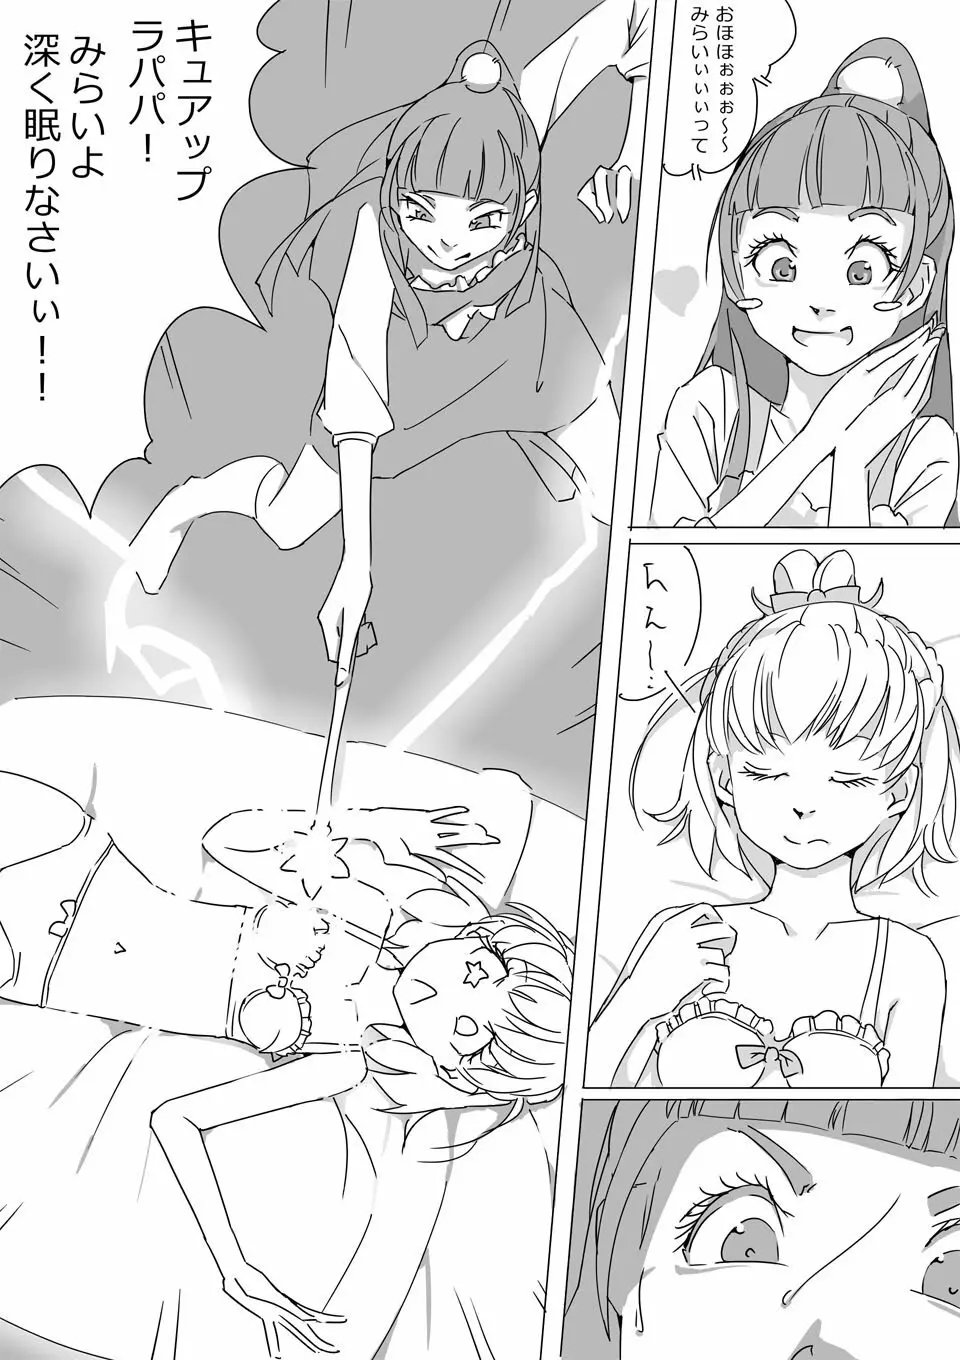 Untitled Precure Doujinshi - page8